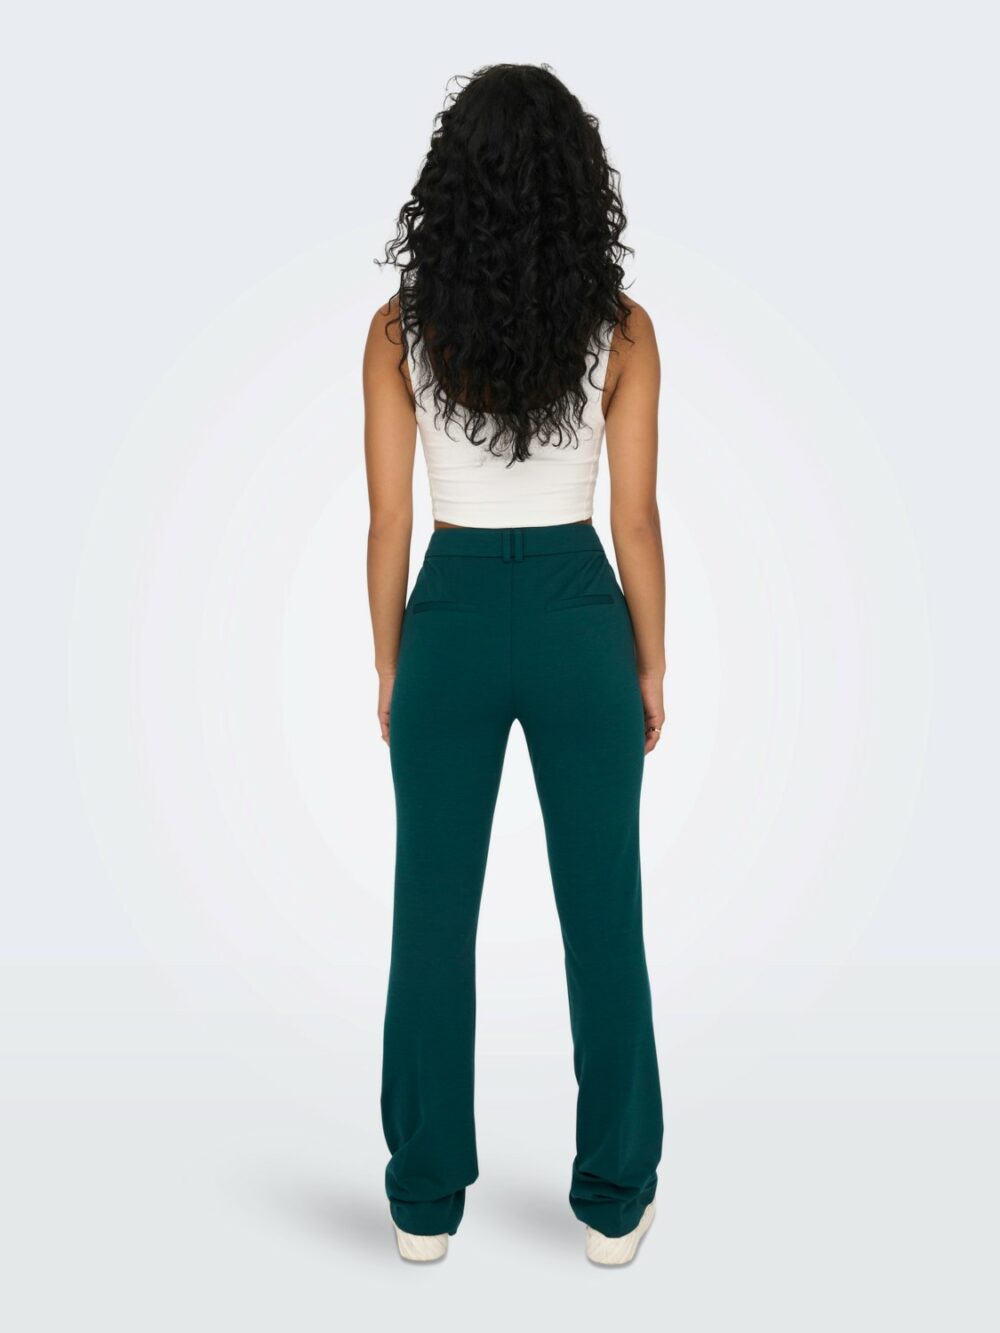 Pantaloni a sigaretta Only onlpeach mw flared pant tlr noos Verde - Foto 3